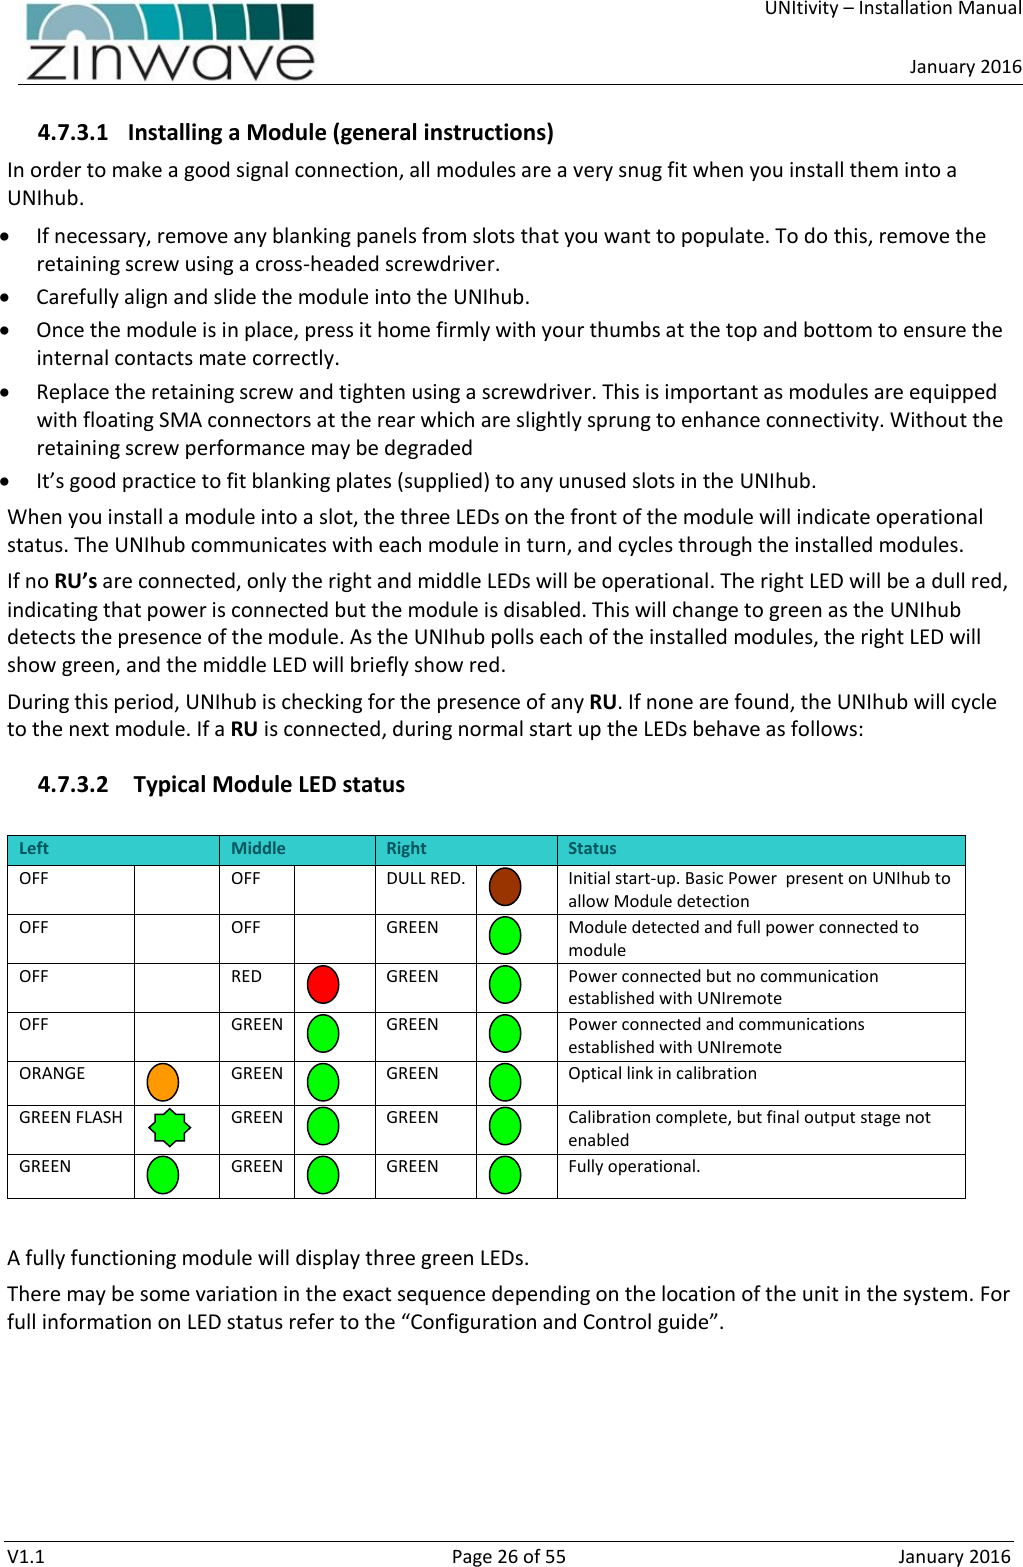     UNItivity – Installation Manual      January 2016  V1.1  Page 26 of 55  January 2016 4.7.3.1 Installing a Module (general instructions) In order to make a good signal connection, all modules are a very snug fit when you install them into a UNIhub.  If necessary, remove any blanking panels from slots that you want to populate. To do this, remove the retaining screw using a cross-headed screwdriver.  Carefully align and slide the module into the UNIhub.  Once the module is in place, press it home firmly with your thumbs at the top and bottom to ensure the internal contacts mate correctly.  Replace the retaining screw and tighten using a screwdriver. This is important as modules are equipped with floating SMA connectors at the rear which are slightly sprung to enhance connectivity. Without the retaining screw performance may be degraded  It’s good practice to fit blanking plates (supplied) to any unused slots in the UNIhub. When you install a module into a slot, the three LEDs on the front of the module will indicate operational status. The UNIhub communicates with each module in turn, and cycles through the installed modules.  If no RU’s are connected, only the right and middle LEDs will be operational. The right LED will be a dull red, indicating that power is connected but the module is disabled. This will change to green as the UNIhub detects the presence of the module. As the UNIhub polls each of the installed modules, the right LED will show green, and the middle LED will briefly show red. During this period, UNIhub is checking for the presence of any RU. If none are found, the UNIhub will cycle to the next module. If a RU is connected, during normal start up the LEDs behave as follows: 4.7.3.2  Typical Module LED status  Left Middle Right Status OFF  OFF  DULL RED.   Initial start-up. Basic Power  present on UNIhub to allow Module detection OFF  OFF  GREEN      Module detected and full power connected to module OFF  RED          GREEN     Power connected but no communication established with UNIremote OFF  GREEN    GREEN    Power connected and communications  established with UNIremote ORANGE  GREEN    GREEN    Optical link in calibration GREEN FLASH   GREEN    GREEN    Calibration complete, but final output stage not enabled GREEN     GREEN    GREEN    Fully operational.  A fully functioning module will display three green LEDs. There may be some variation in the exact sequence depending on the location of the unit in the system. For full information on LED status refer to the “Configuration and Control guide”. 